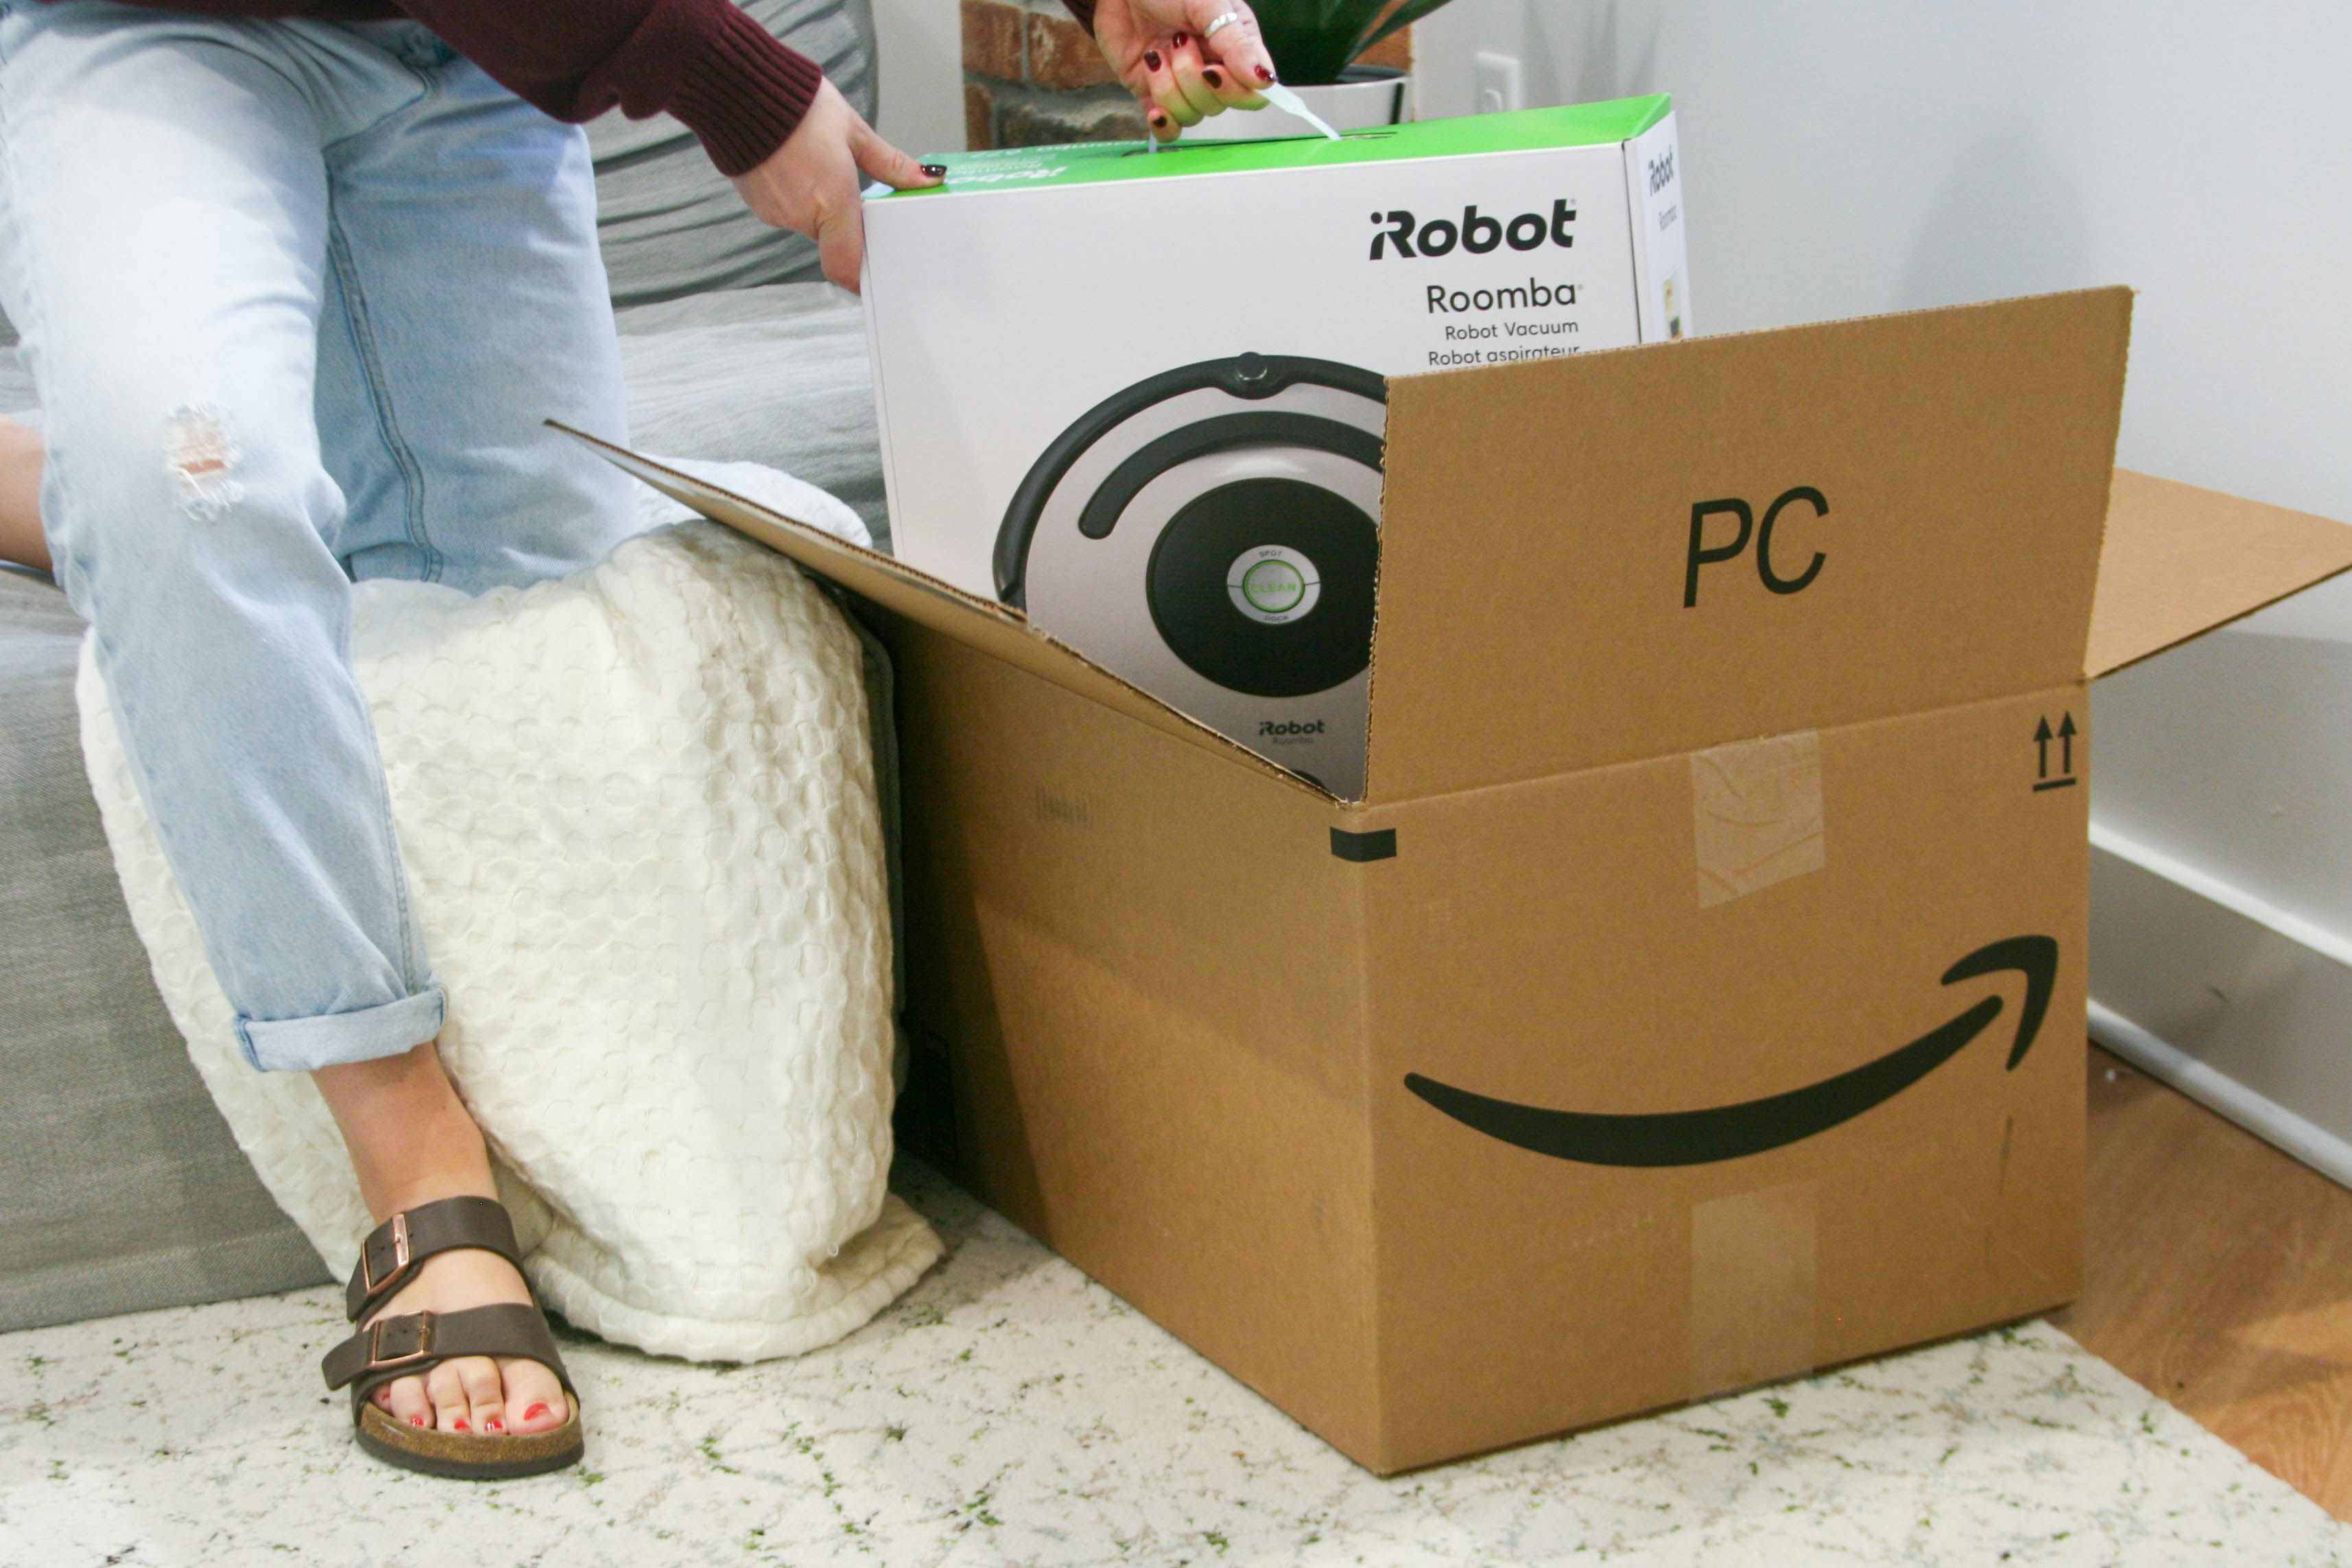 robot roomba coming out of amazon box